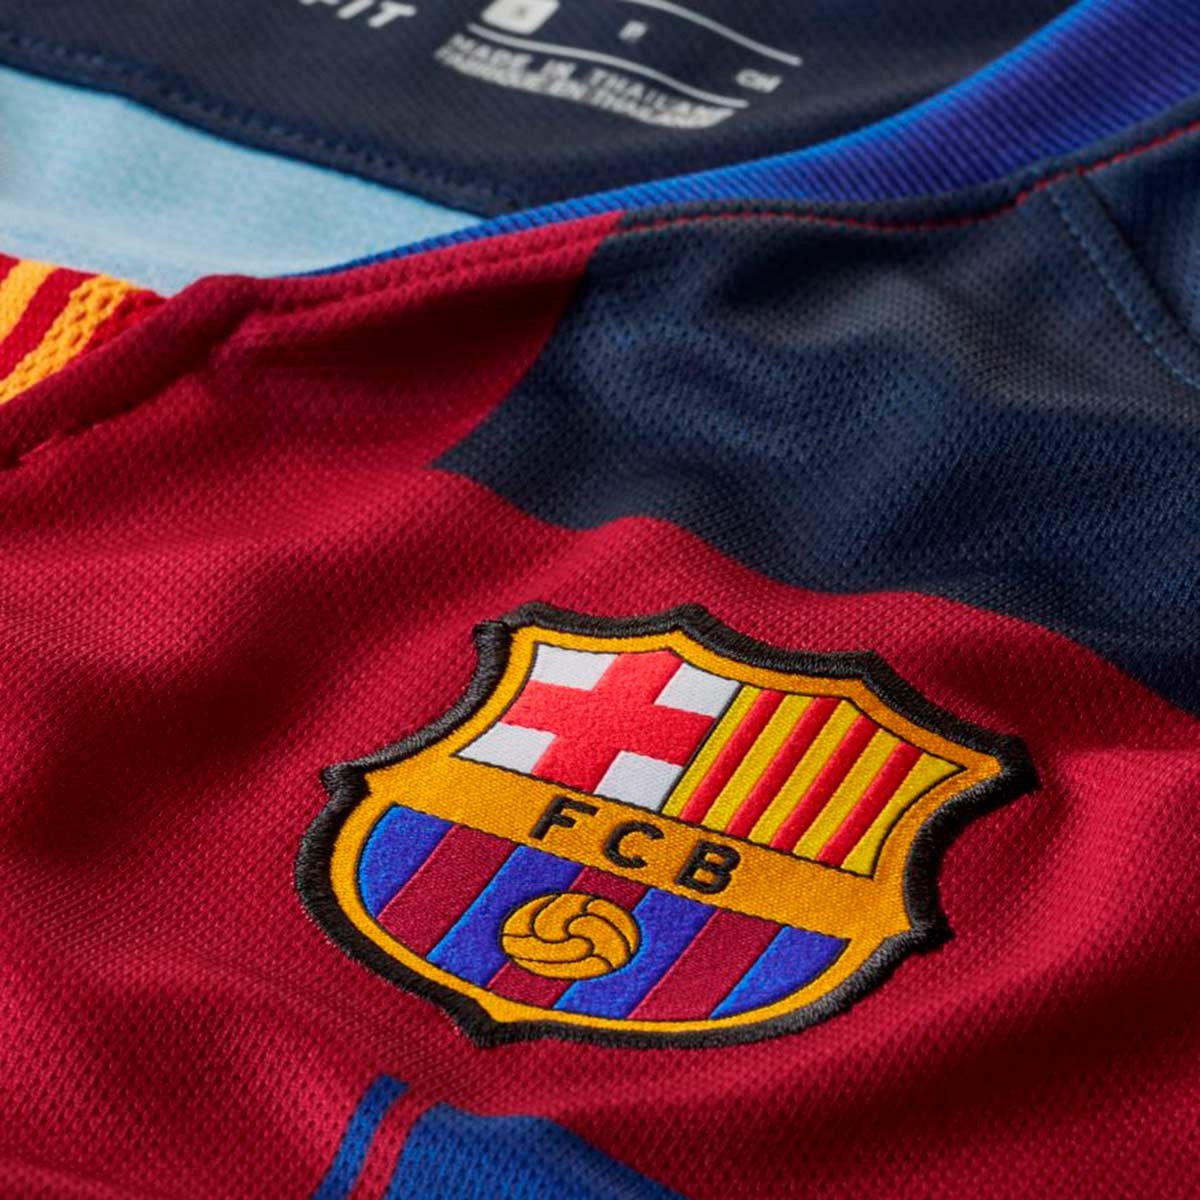 Barcelona Yellow And Red Jersey - Fc Barcelona 20 21 Home Kit Released ...